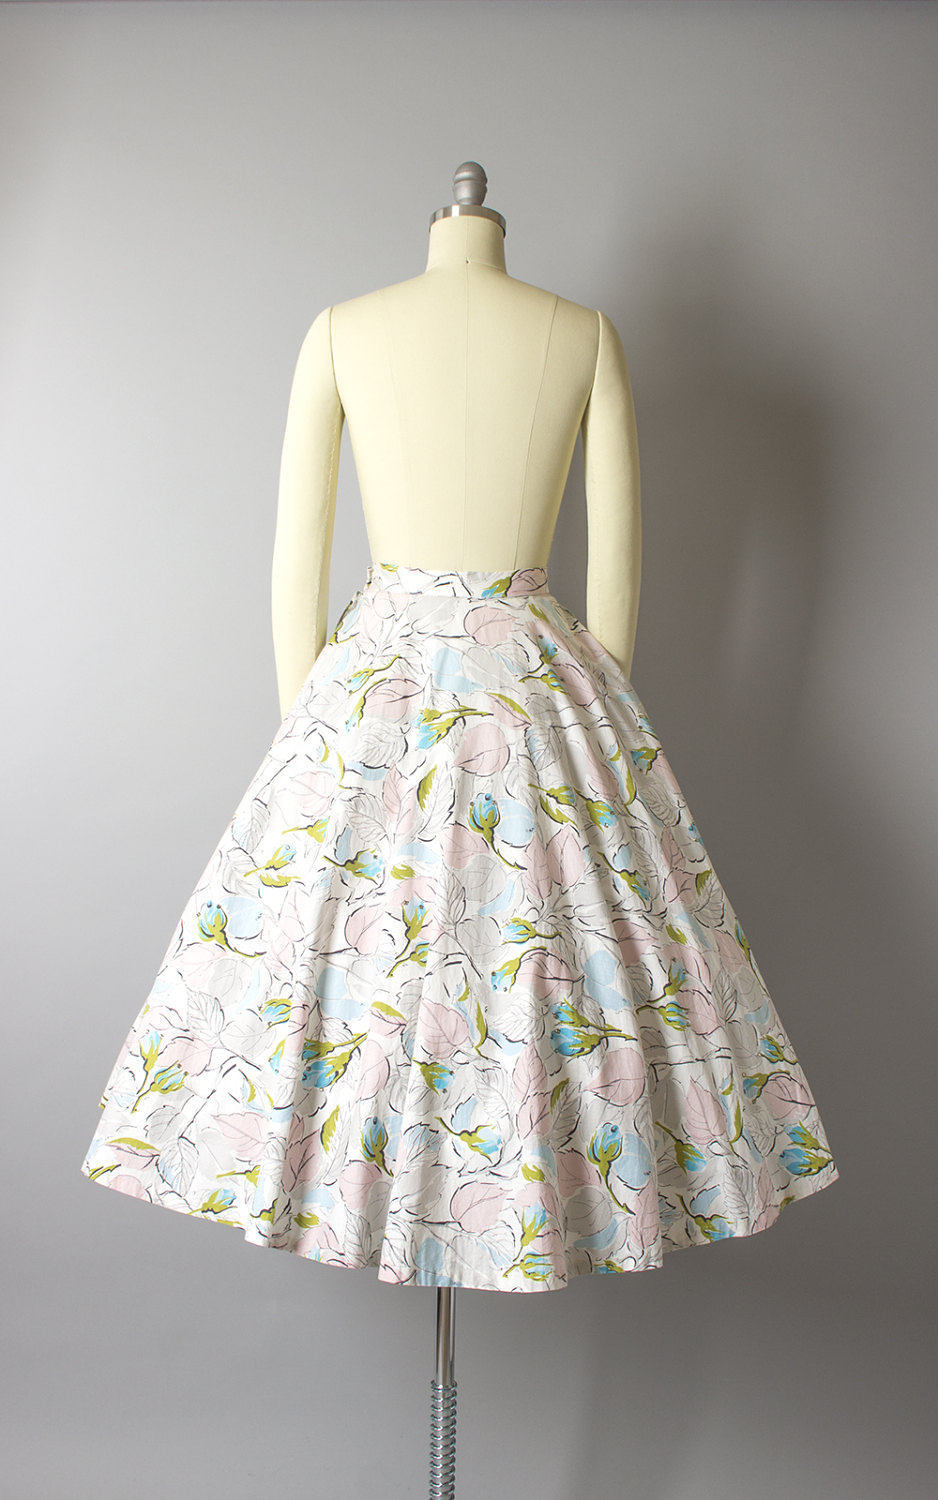 Vintage 1950s Skirt | 50s JERRY GILDEN Rose Floral Cotton Rhinestones Full Circle Skirt with Pockets (small)